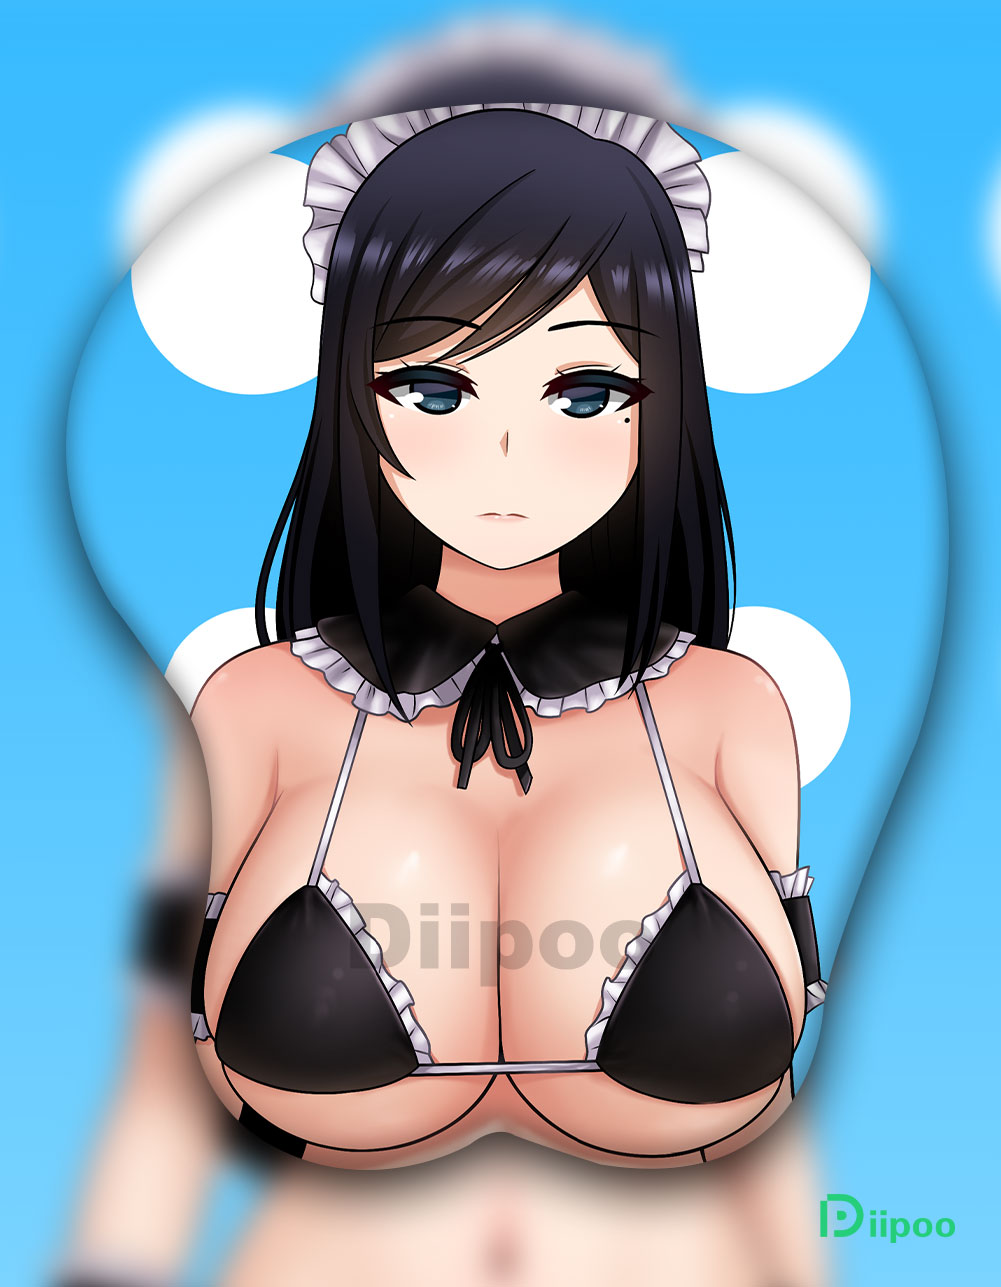 Oppai Mousepad | Boobs Mouse Pad | Butt Mouse Pad | Titty Mouse Pad - Page  12 of 30 - Diipoo